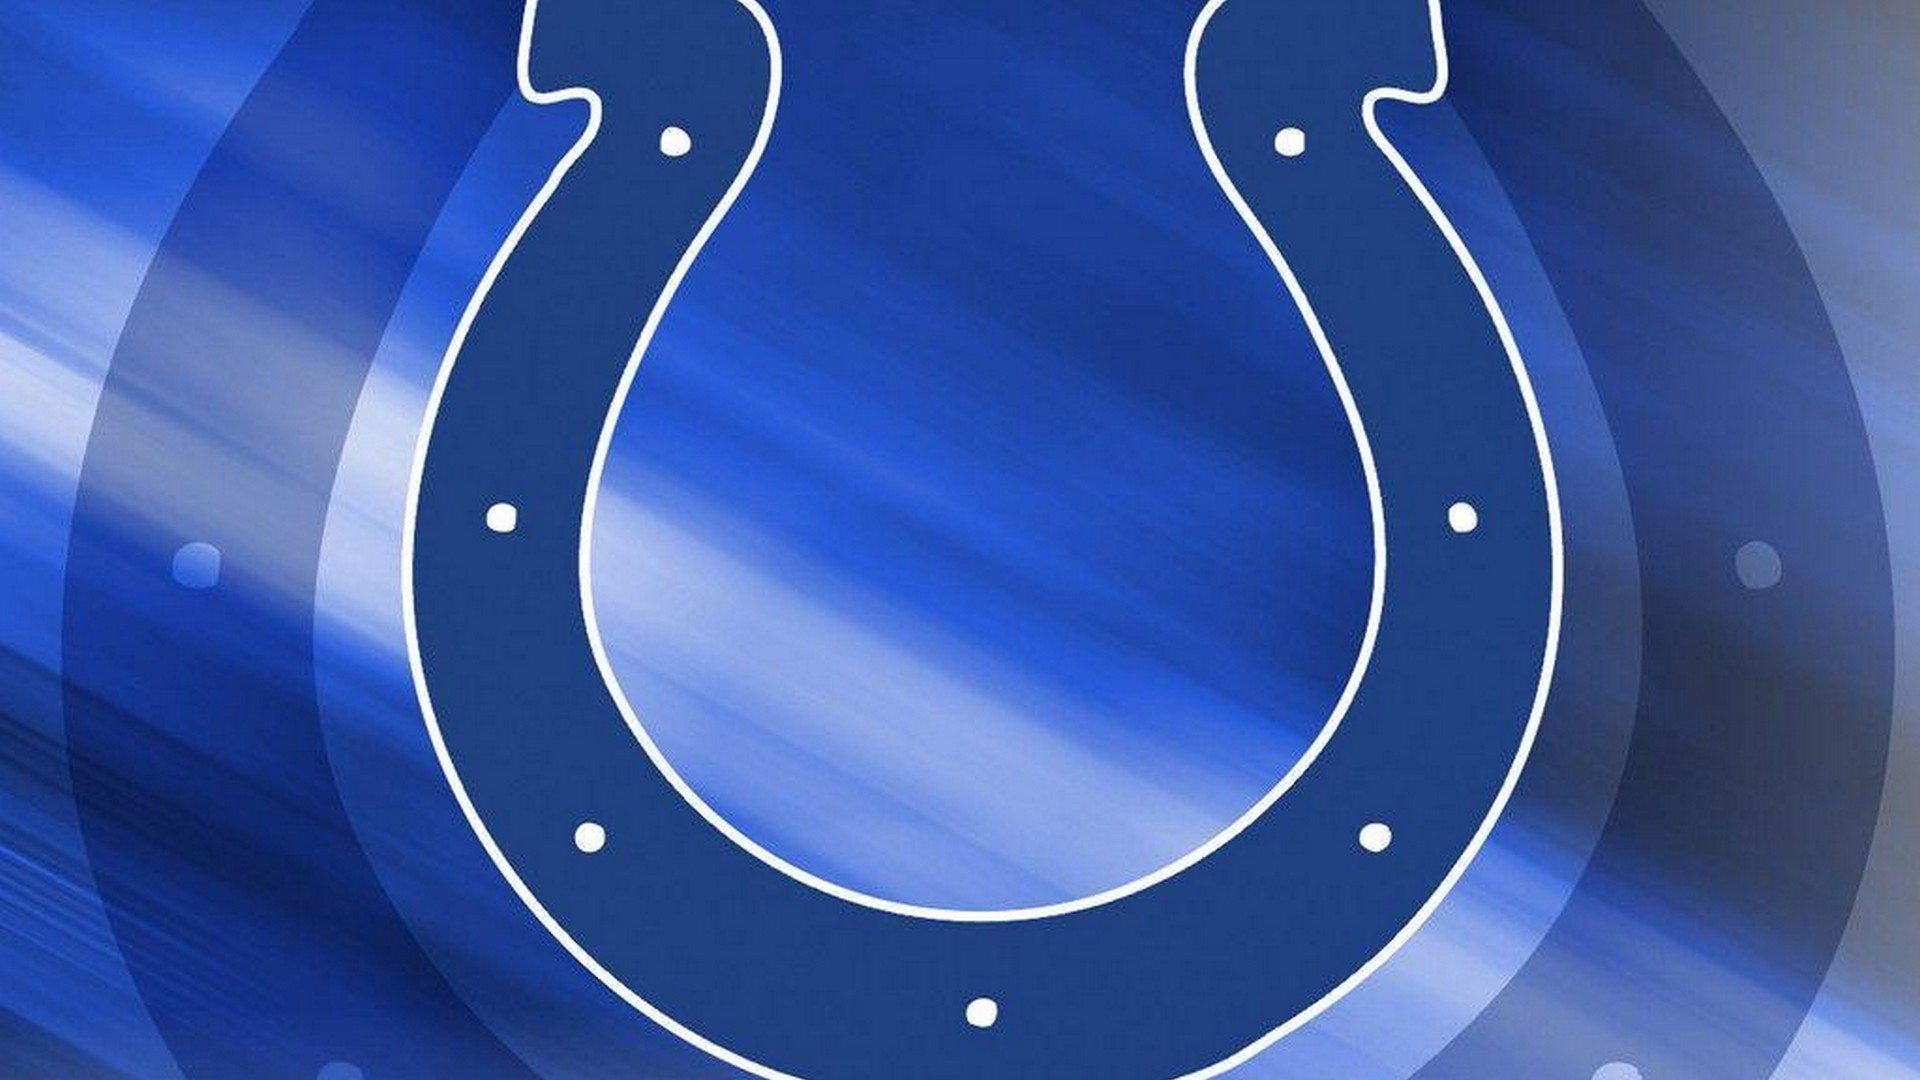 HD Backgrounds Indianapolis Colts NFL With Resolution 1920X1080 pixel. You can make this wallpaper for your Mac or Windows Desktop Background, iPhone, Android or Tablet and another Smartphone device for free